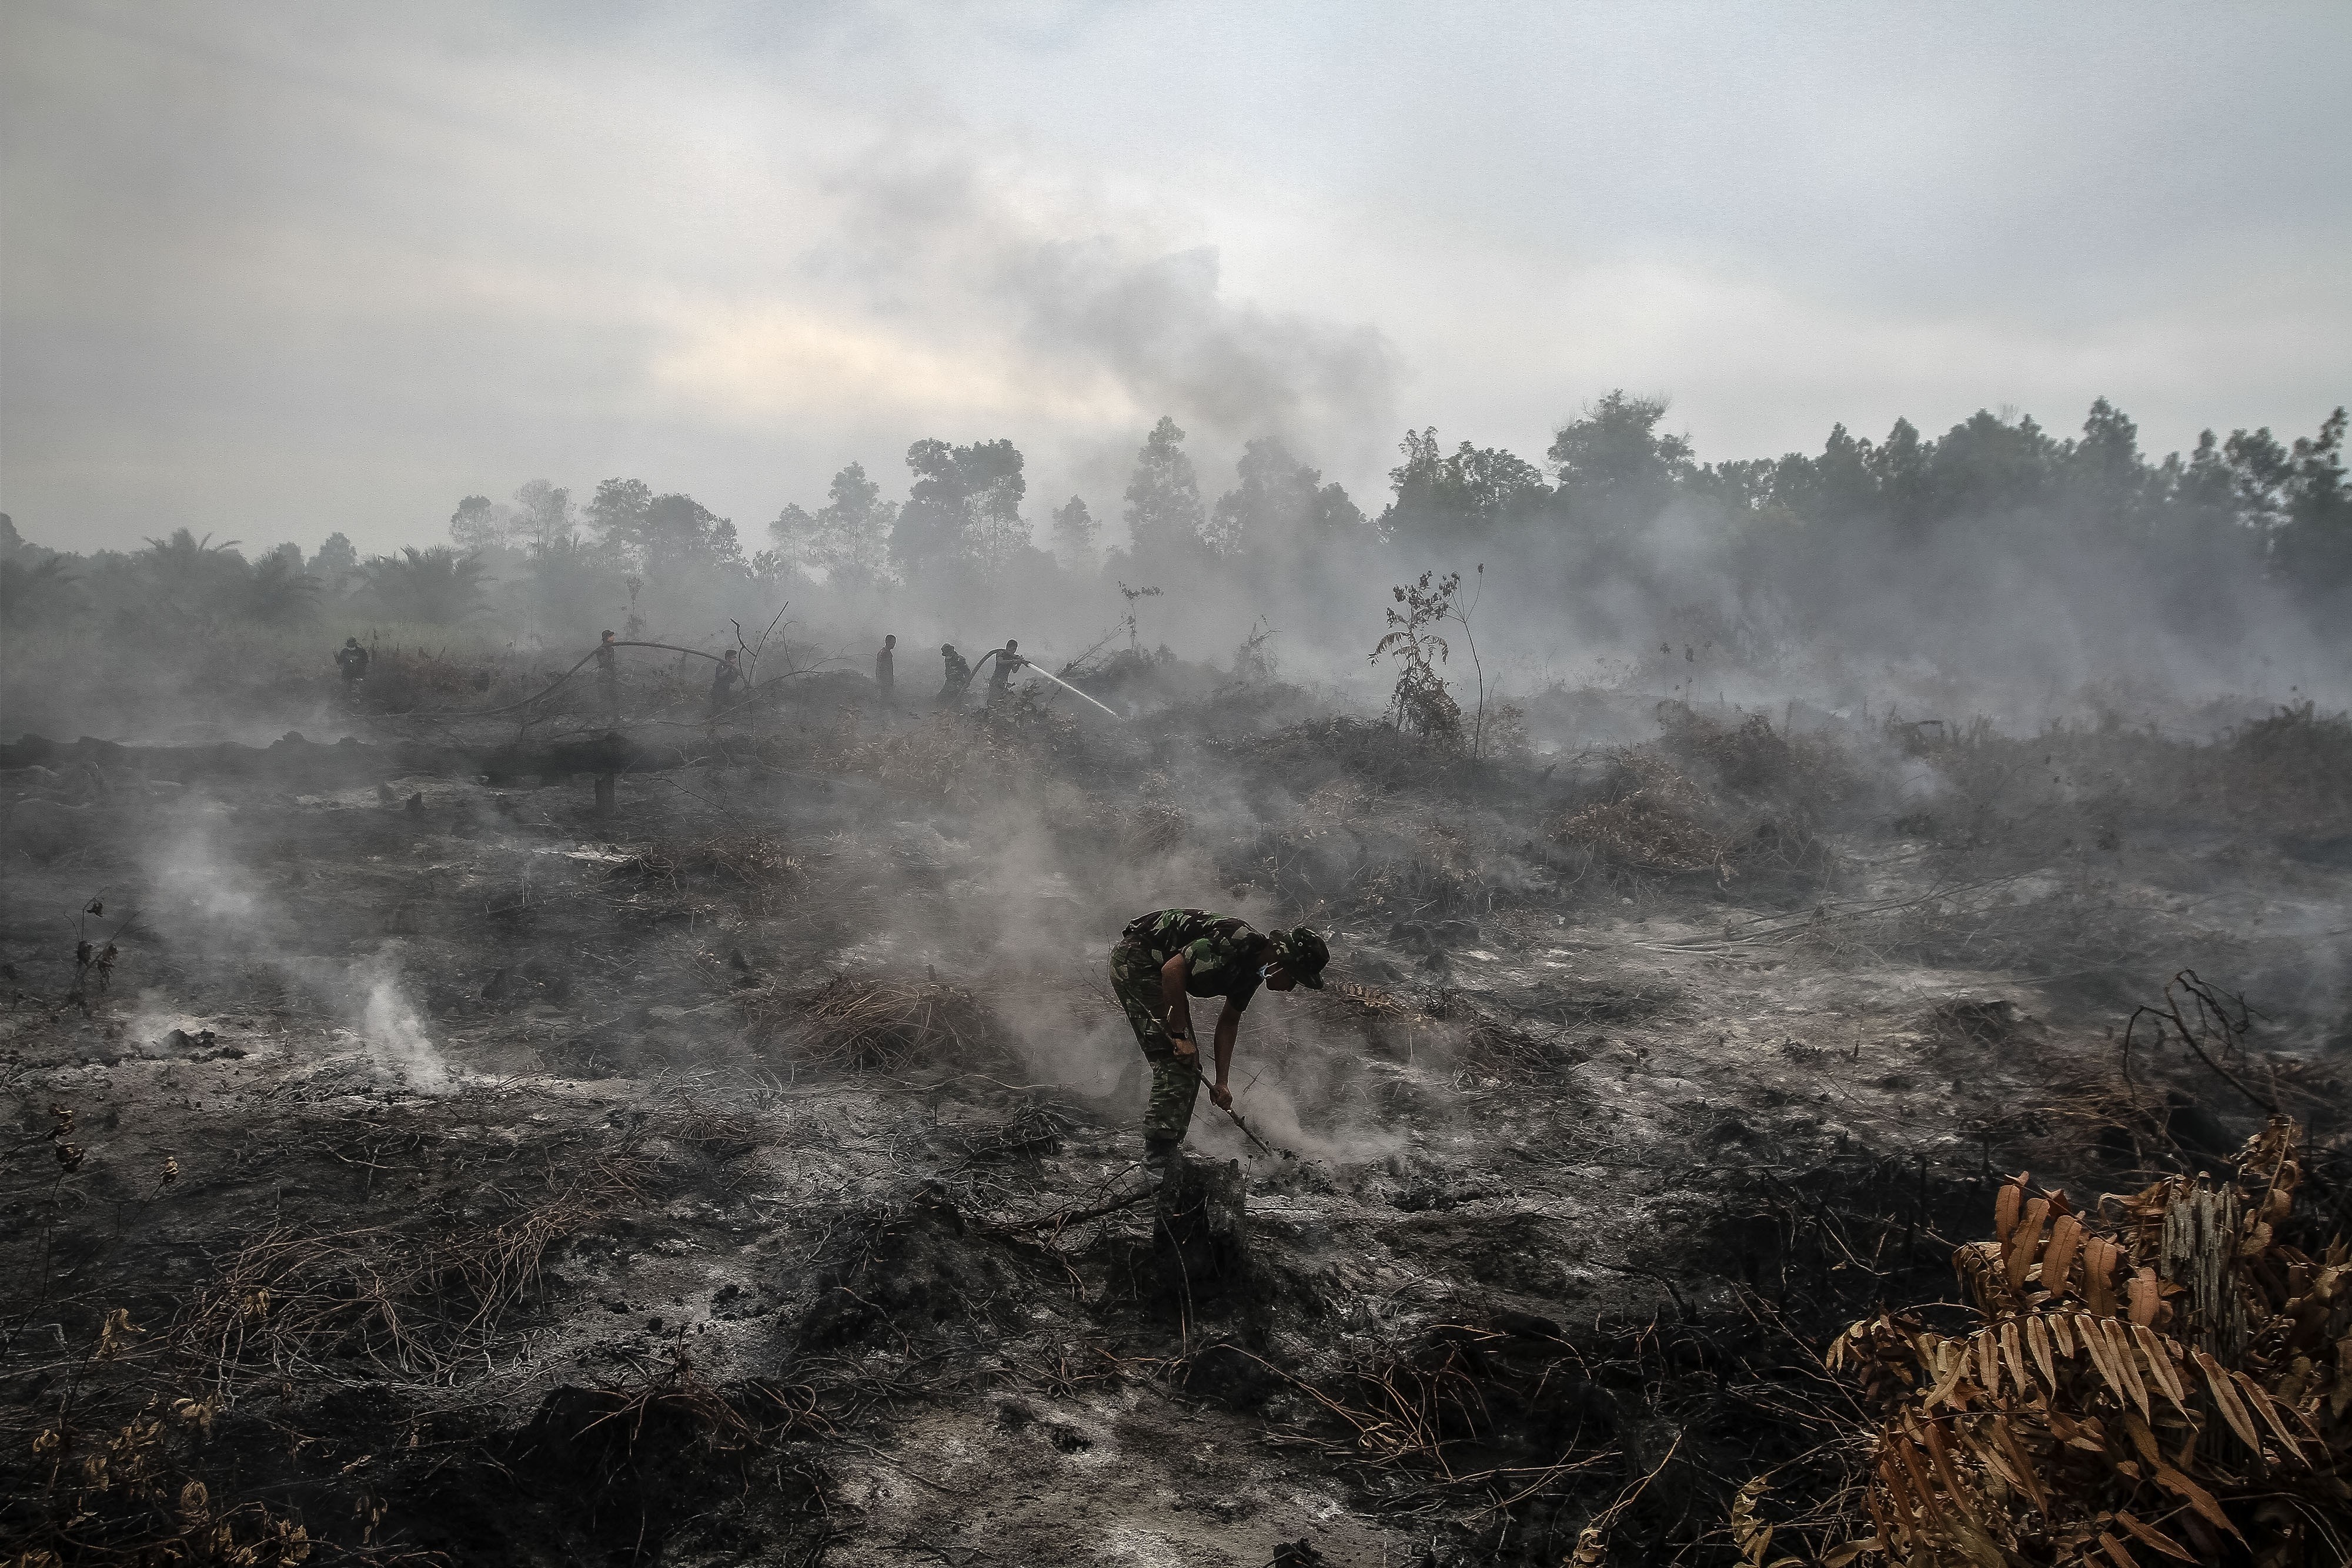 An Indonesian military personnel spray water on forest burned area at Rimbo Panjang Village, in Indonesia's Riau province, on Aug. 6, 2015 (Yenni Safana—Anadolu Agency/Getty Images)